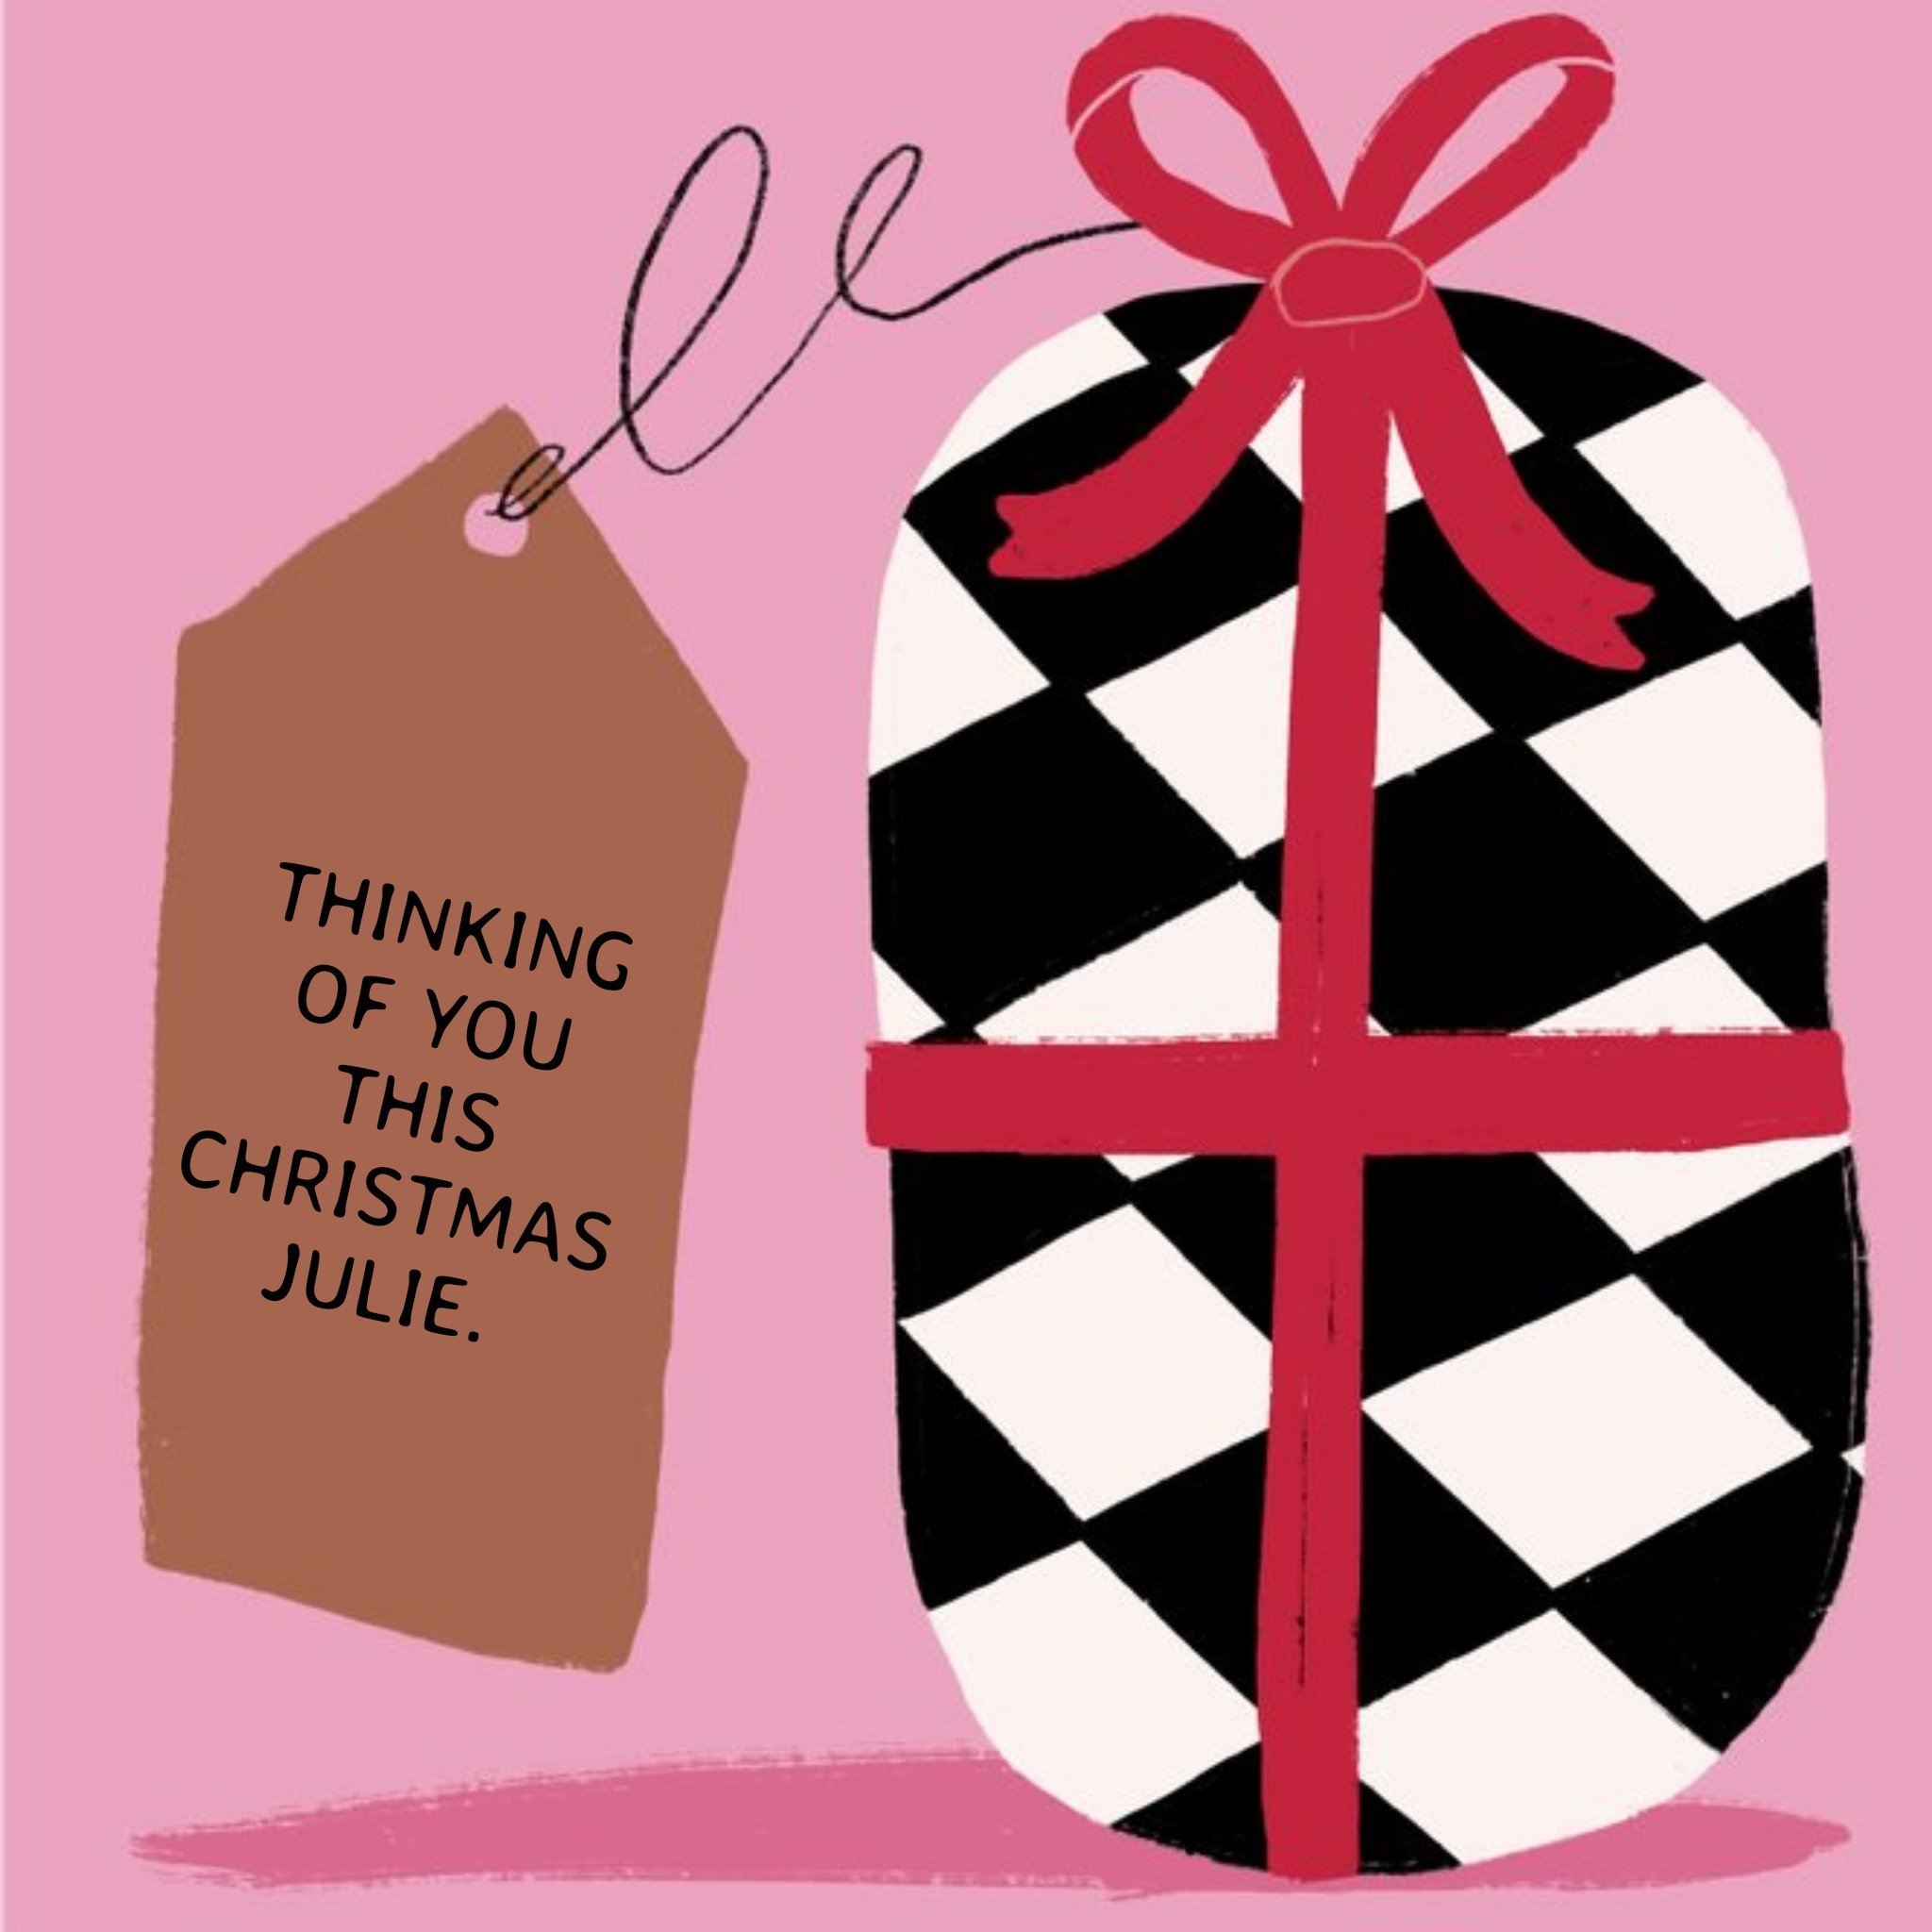 Moonpig Illustration Of A Present With A Chequered Pattern And Tag Christmas Card, Large